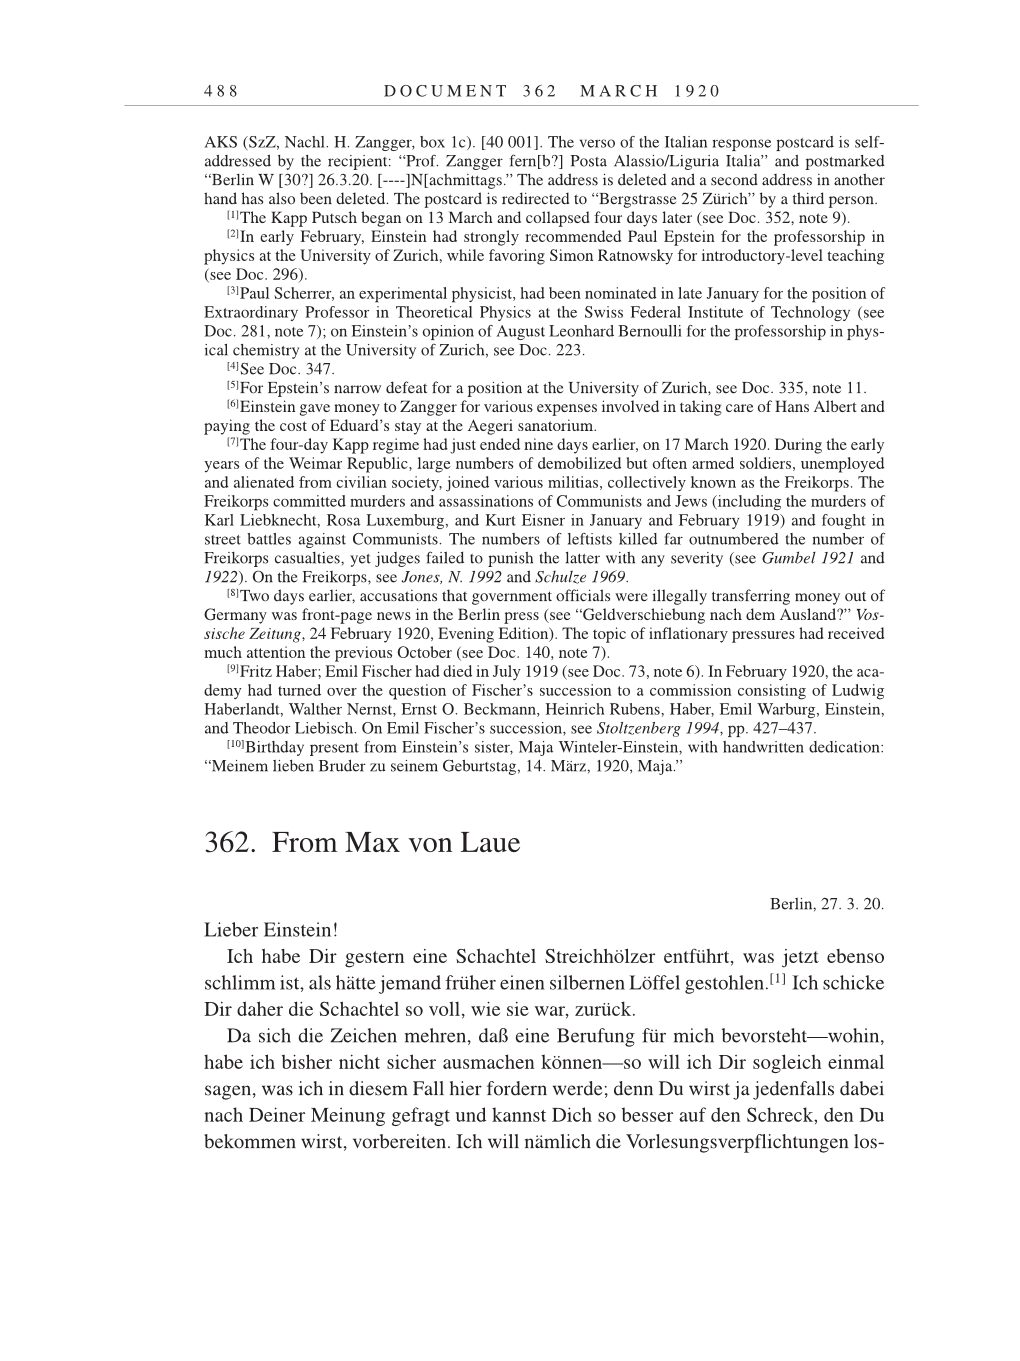 Volume 9: The Berlin Years: Correspondence January 1919-April 1920 page 488